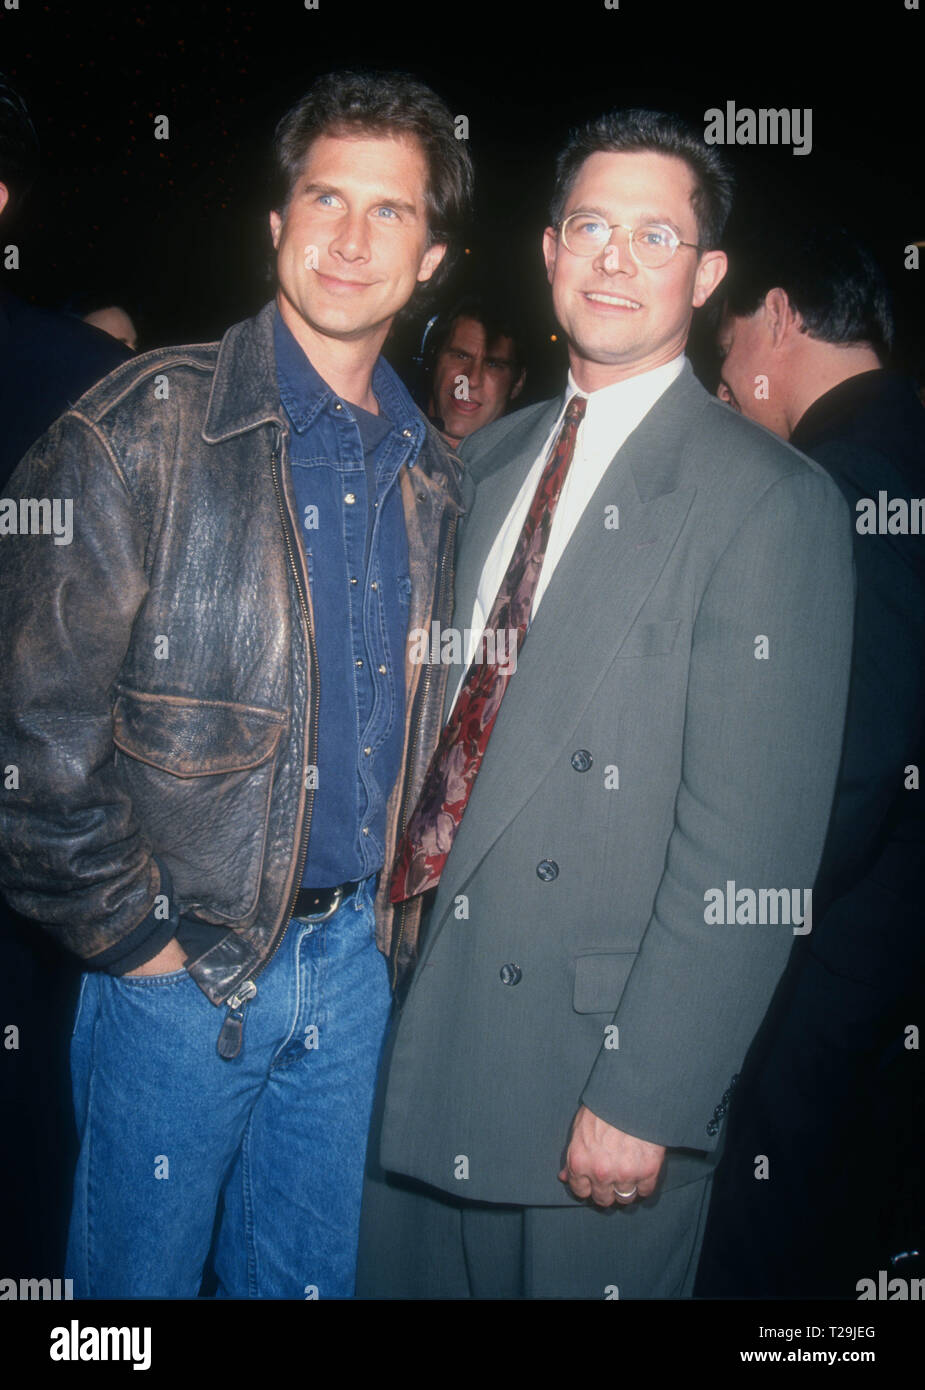 LOS ANGELES, CA - MARCH 9: Actor Parker Stevenson and brother Hutch Parker attend HBO's 'Against The Wall' Premiere on March 9, 1994 at DGA Theatre in Los Angeles, California. Photo by Barry King/Alamy Stock Photo Stock Photo